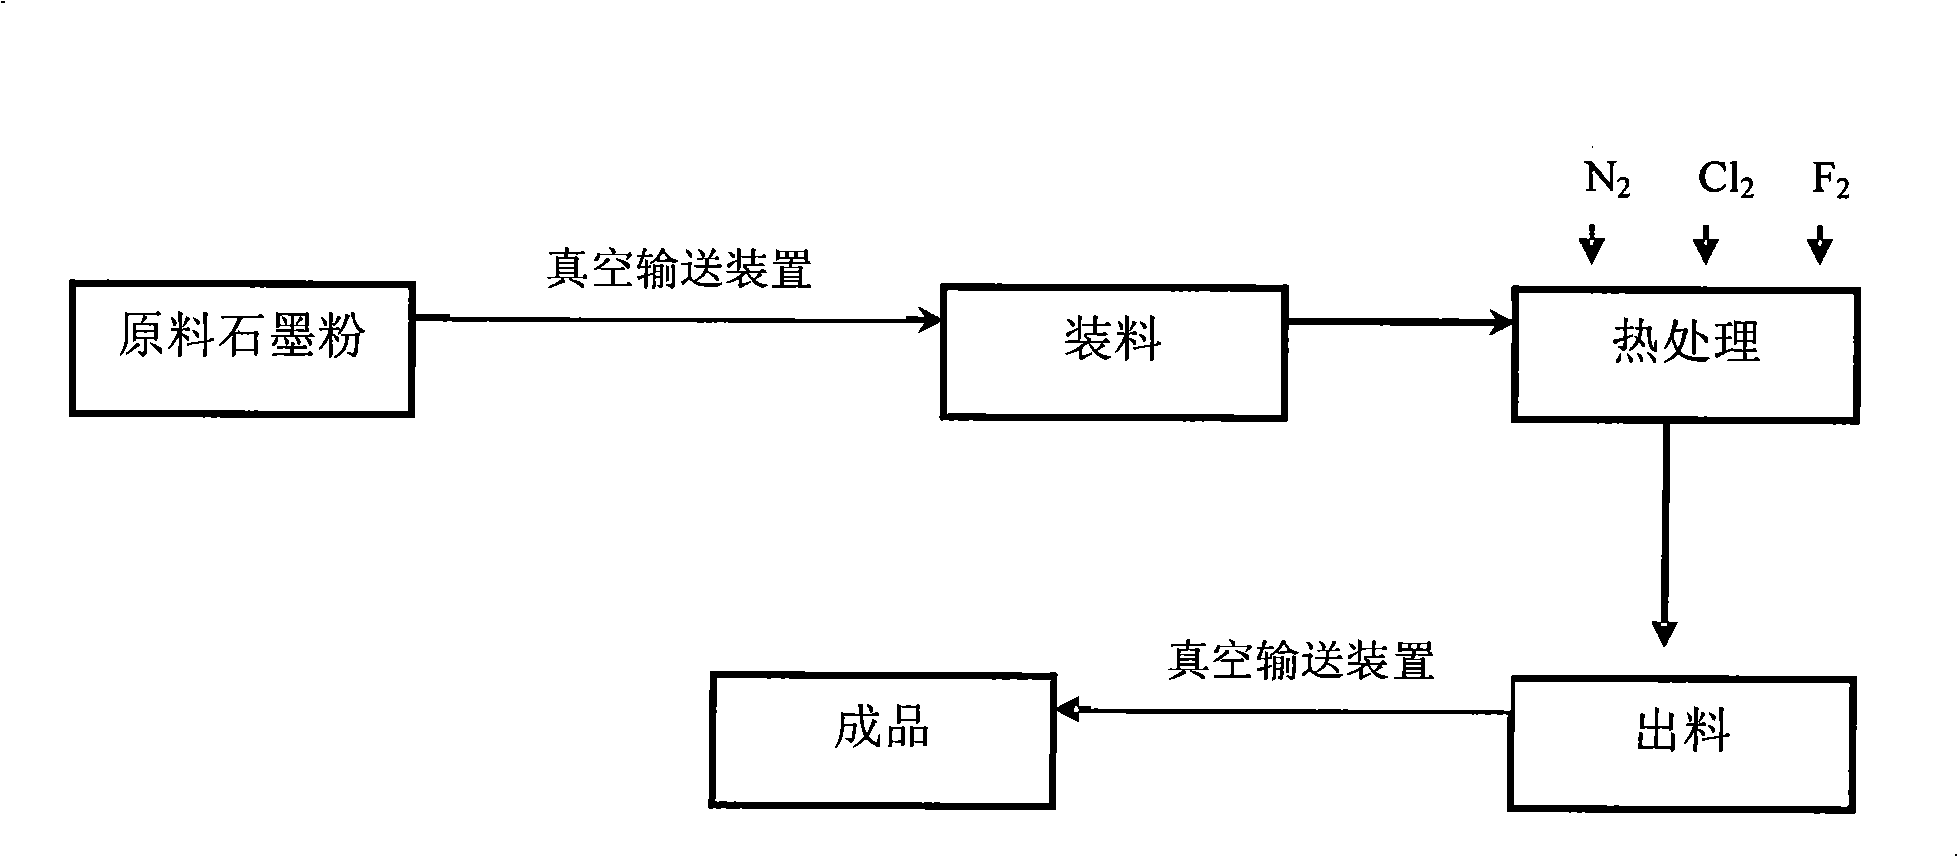 Process and equipment for producing graphite dust